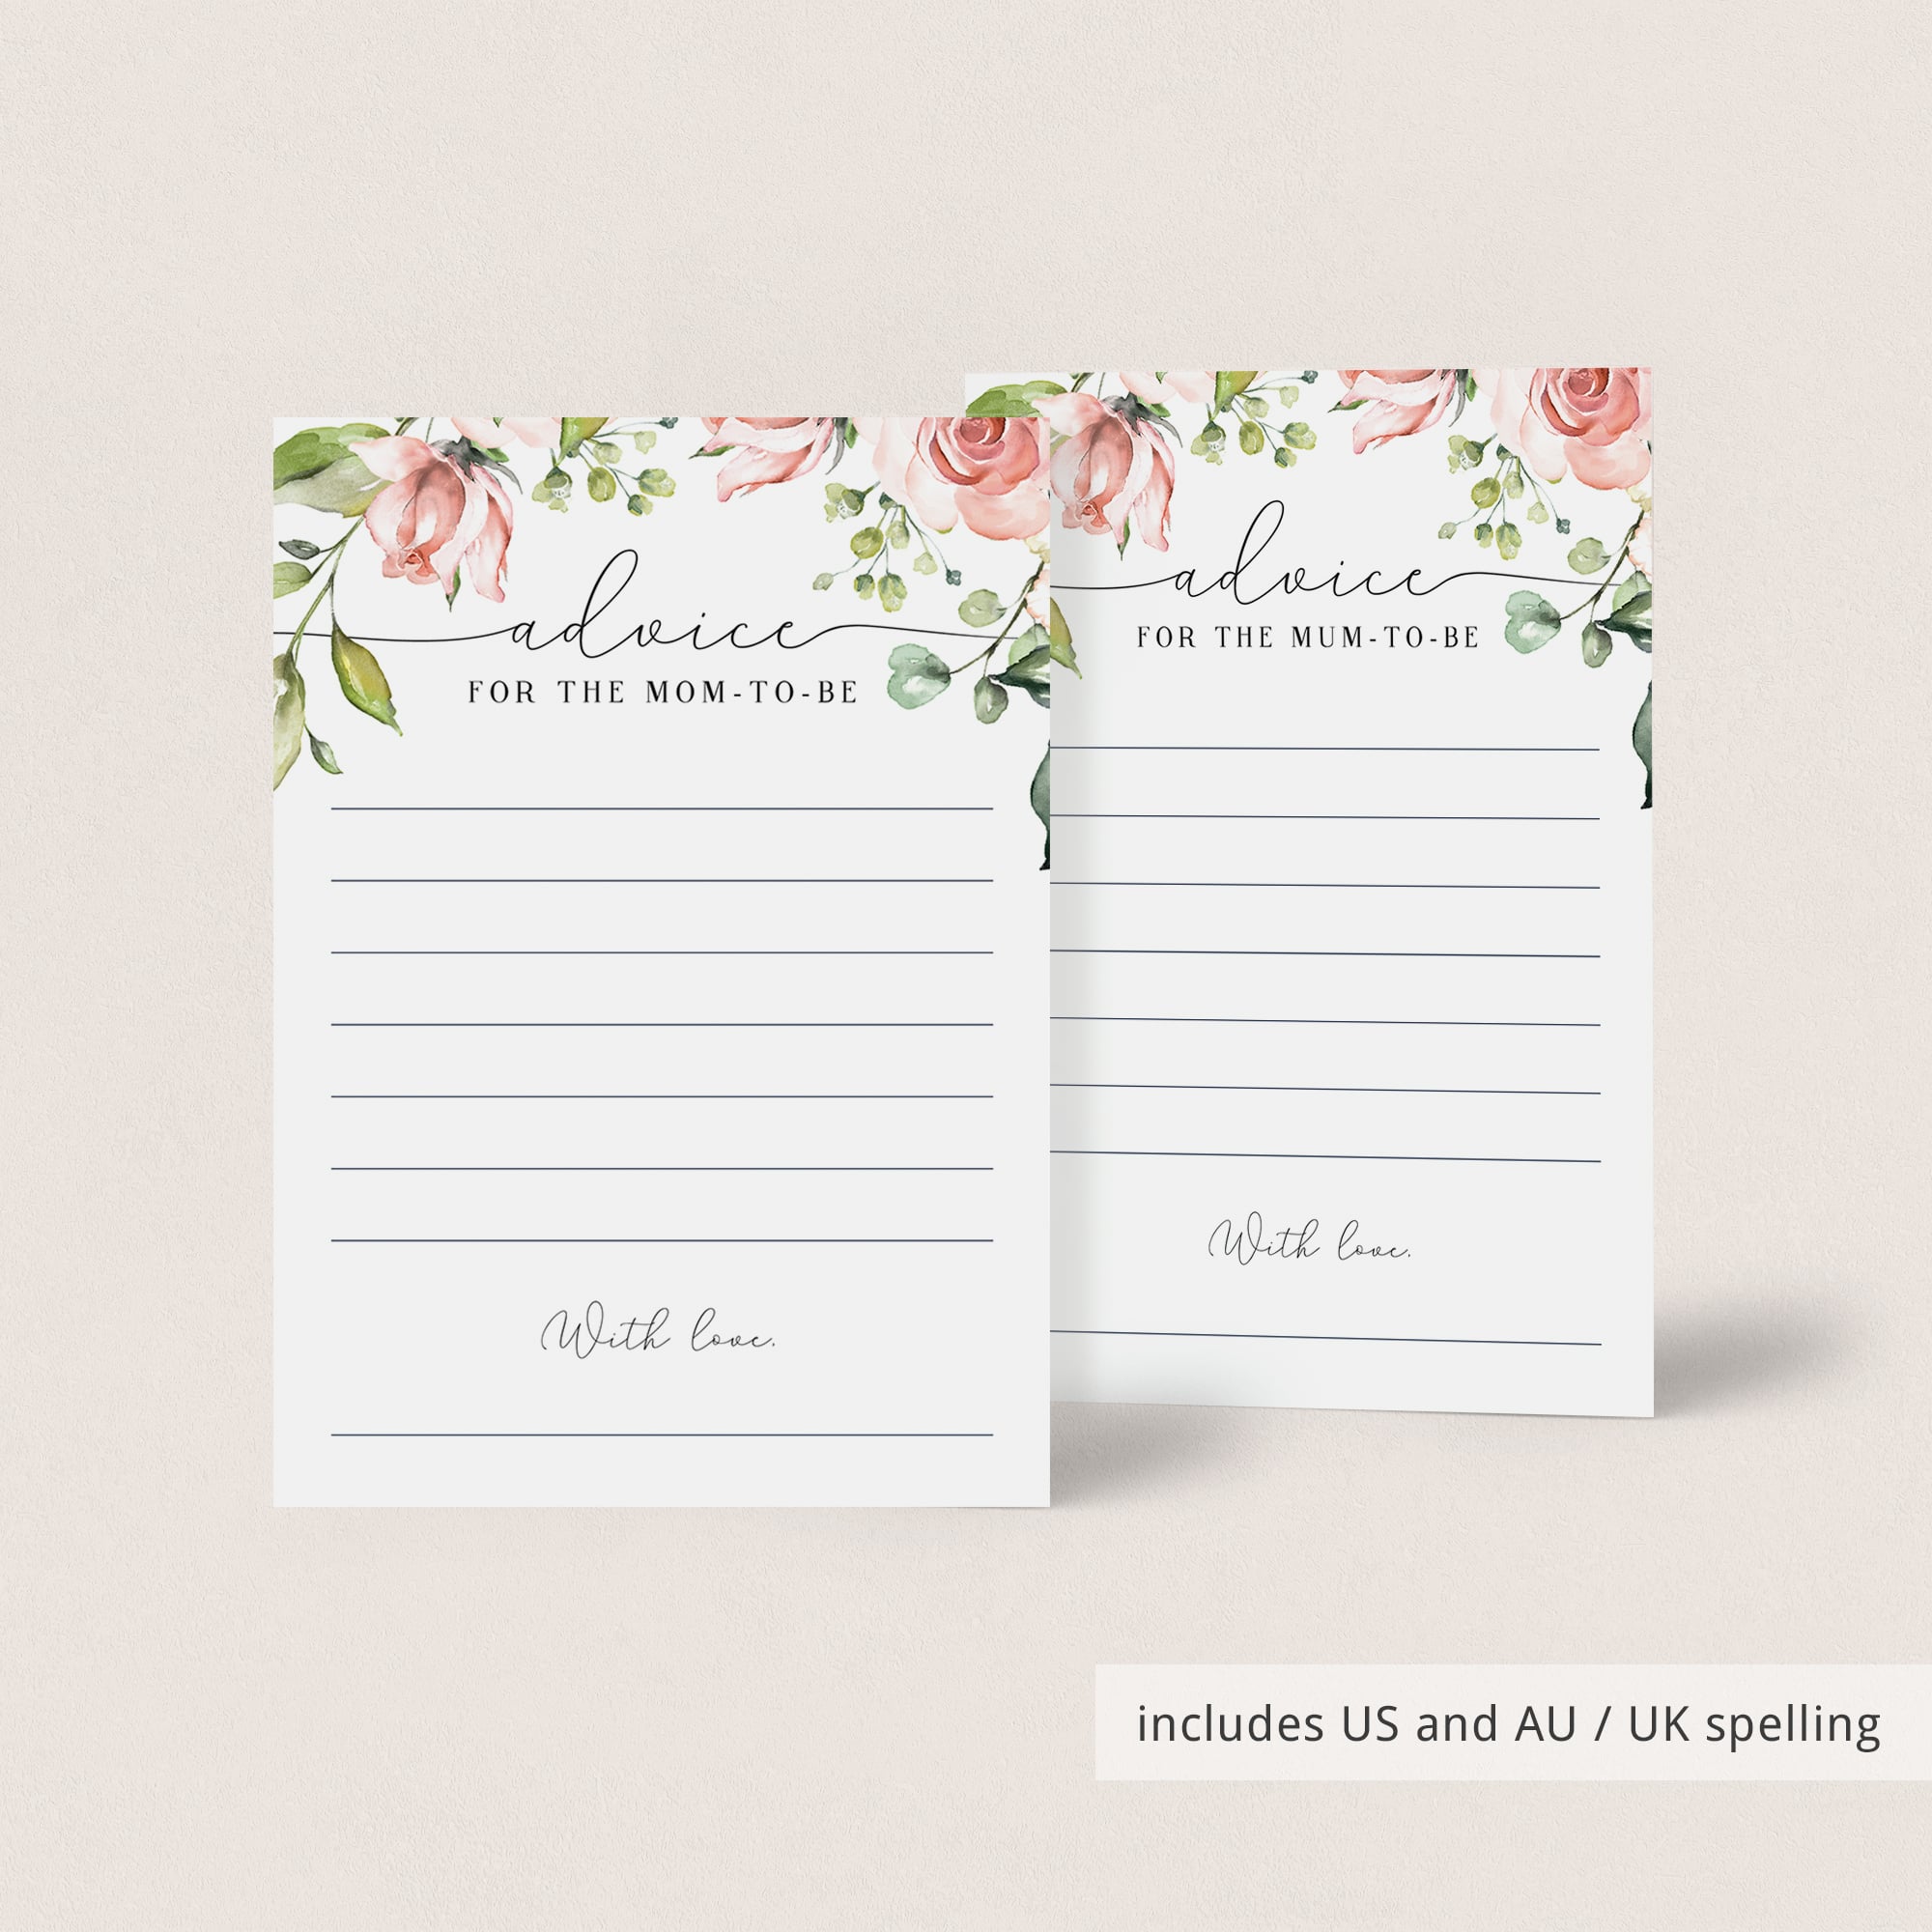 Advice cards for baby shower printables floral theme by LittleSizzle